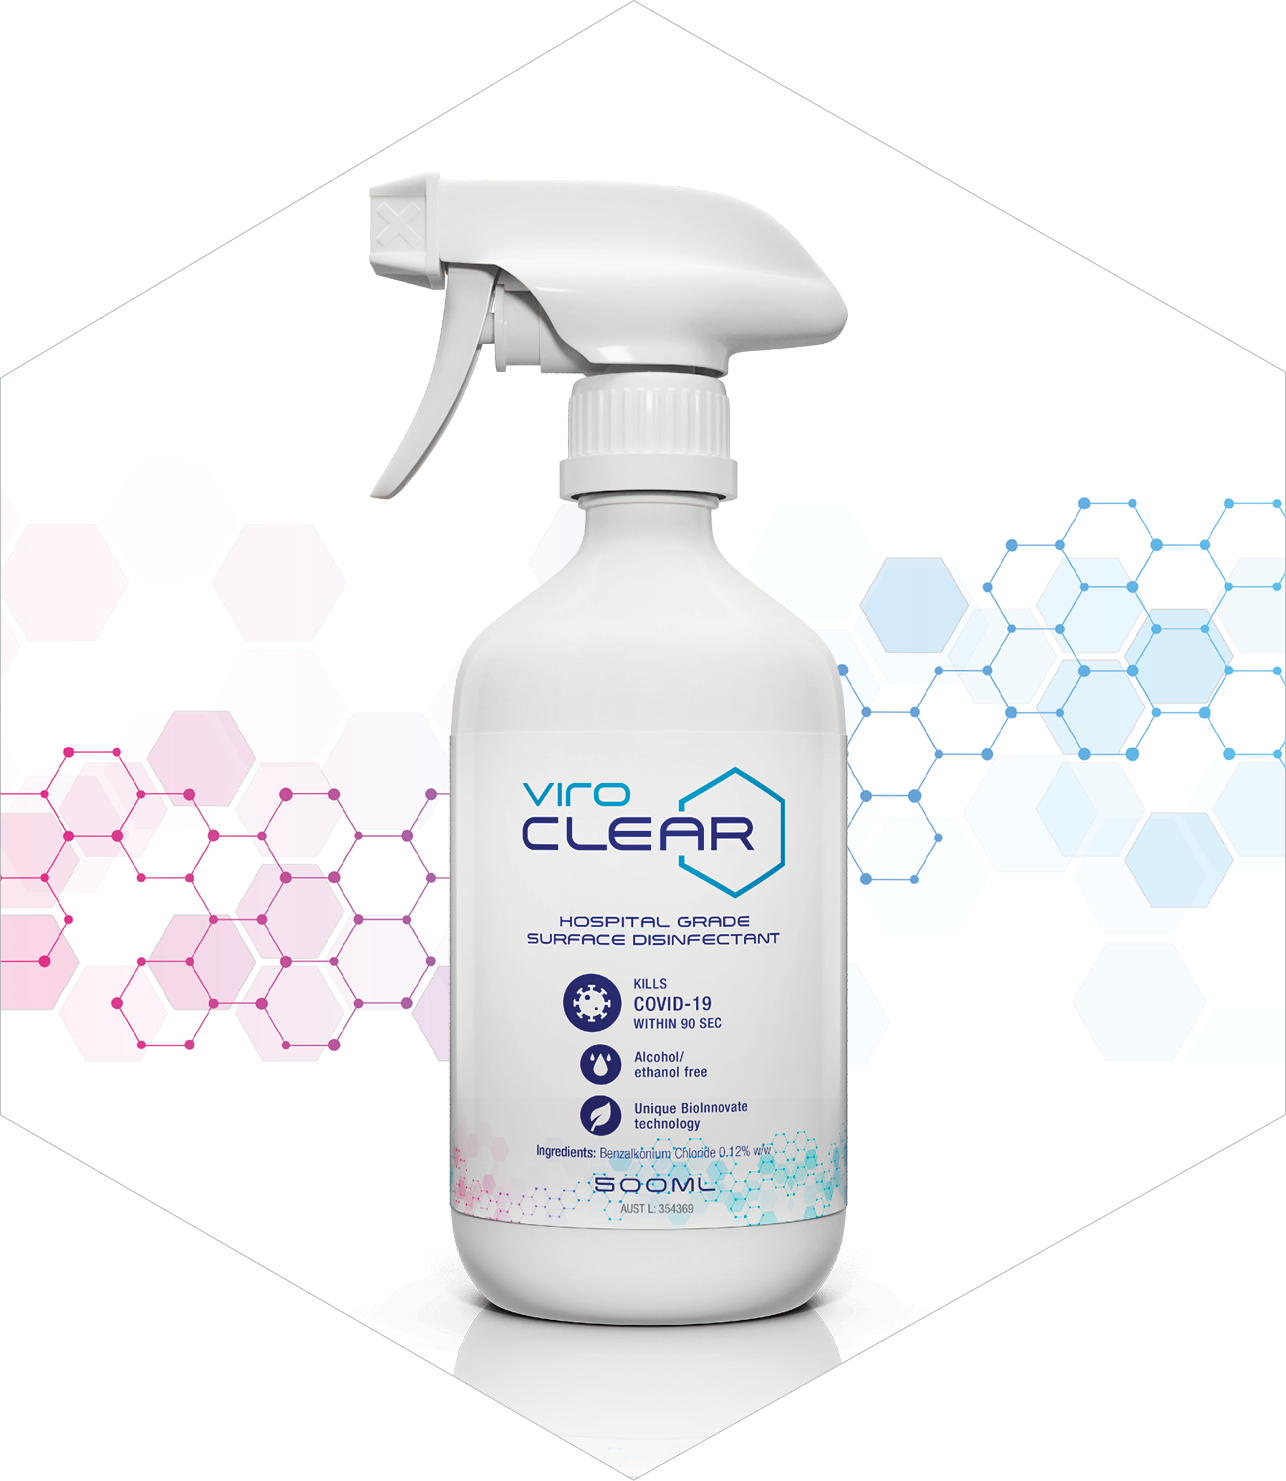 ViroclearSurface Disinfectant | ViroCLEAR